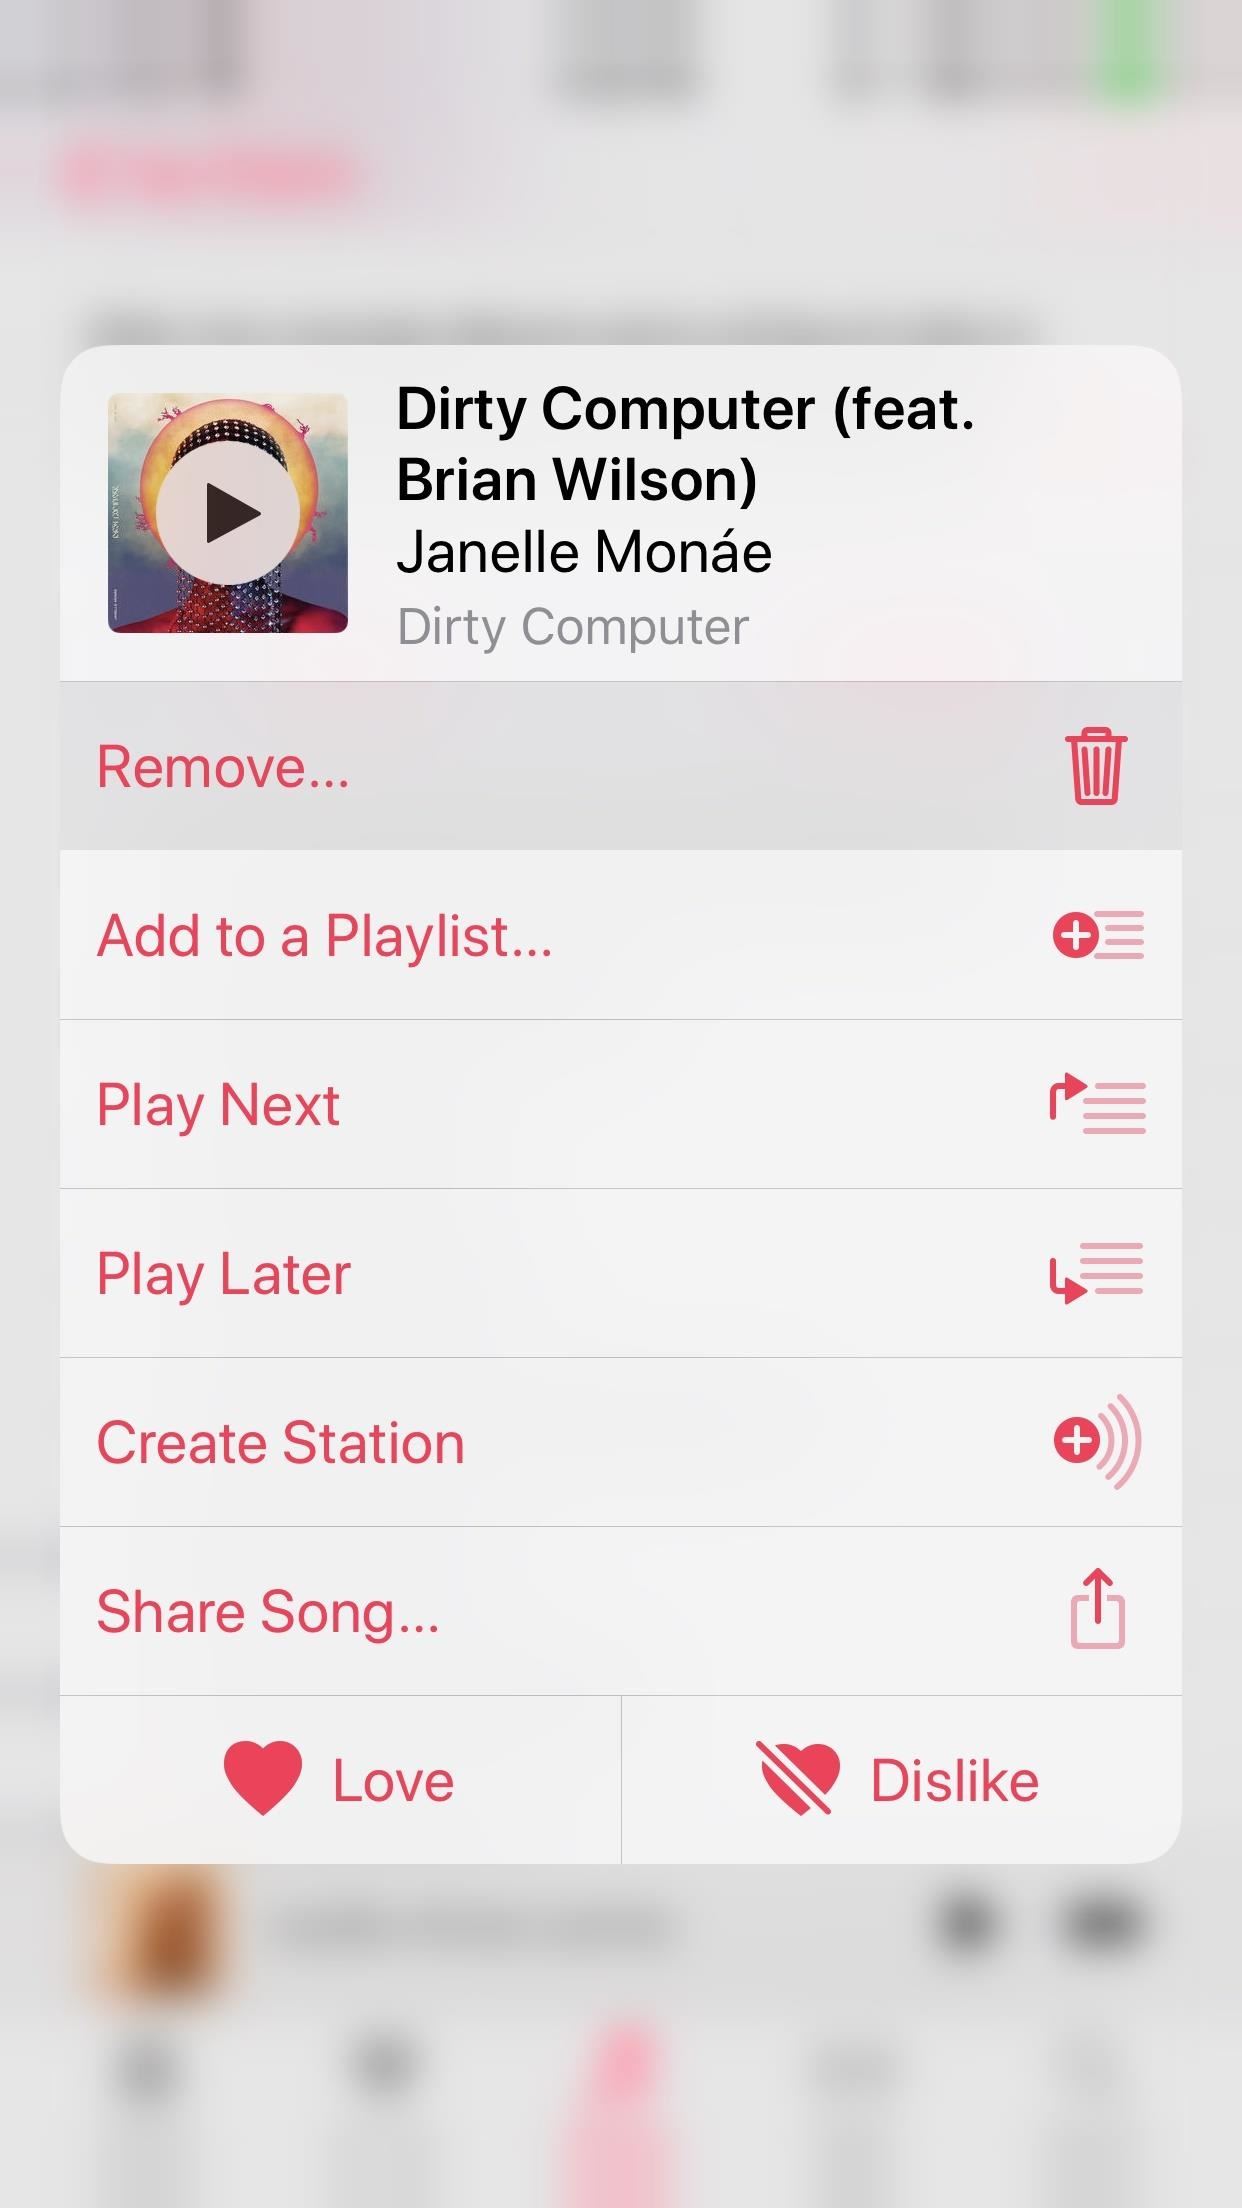 Apple Music 101: How to Automatically Download Tracks for Offline Playback That You Save to Your Library